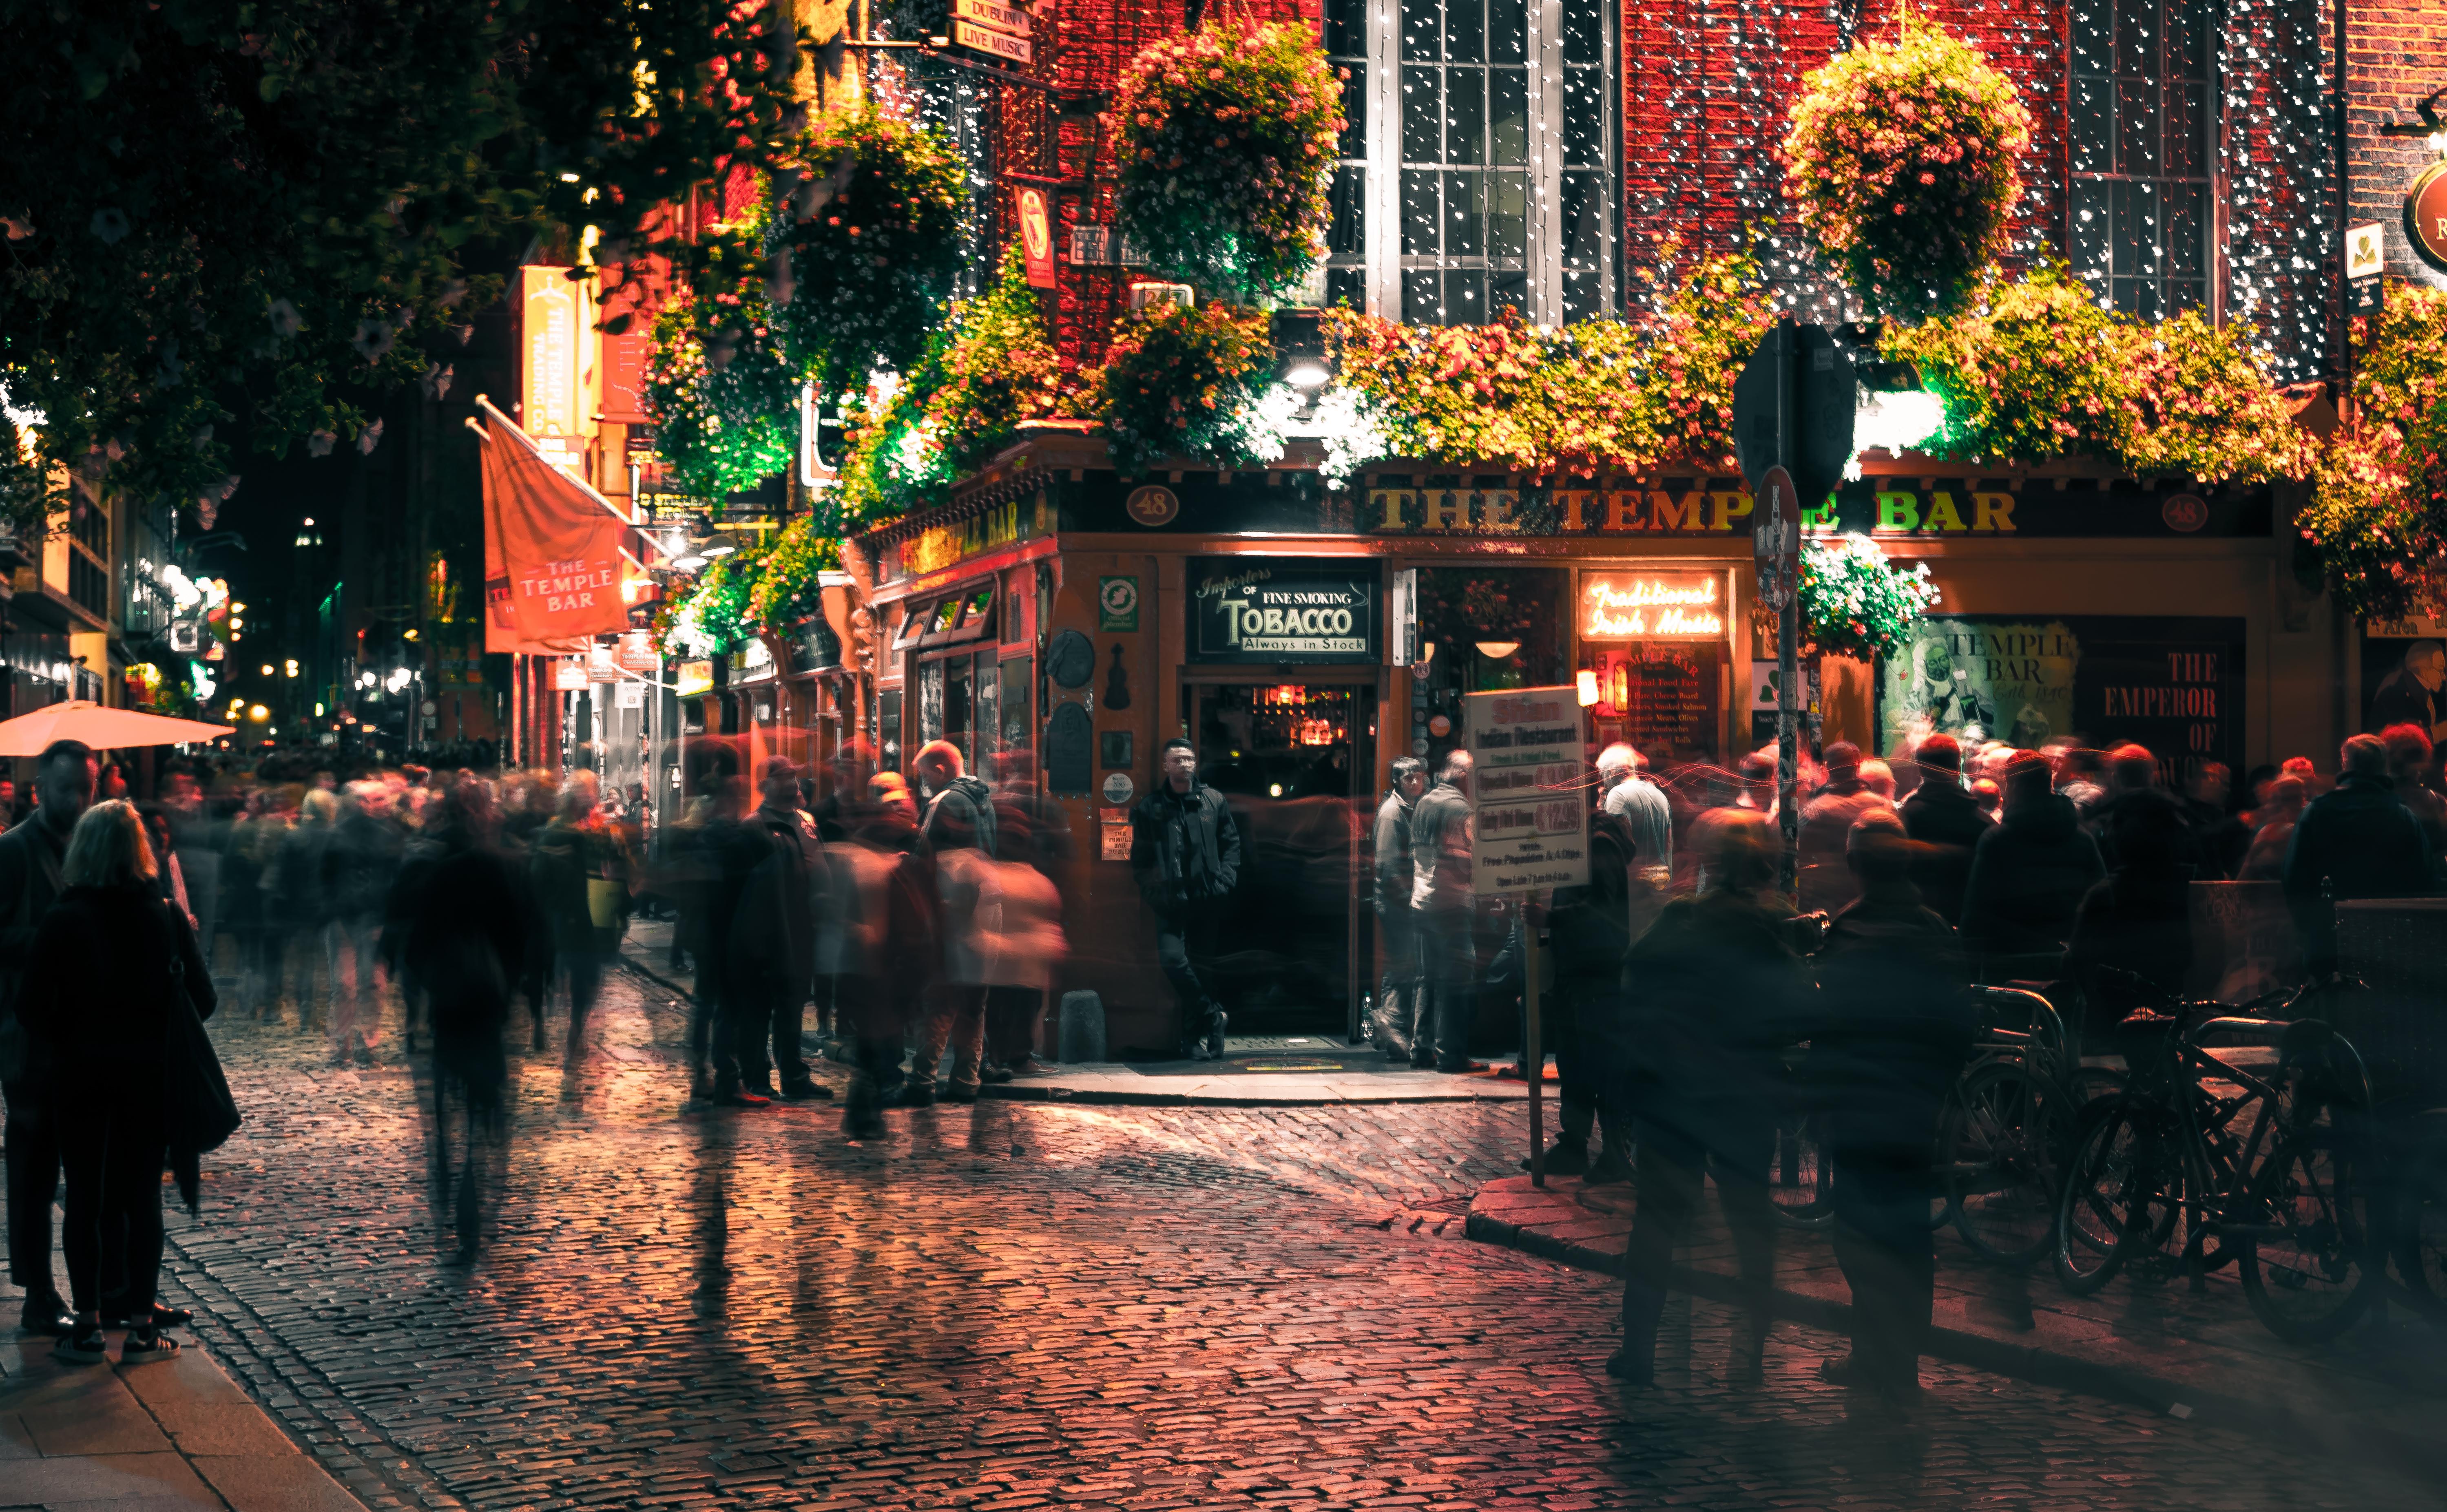 Picture I Took Last Week At The Temple Bar In Dublin Am New To